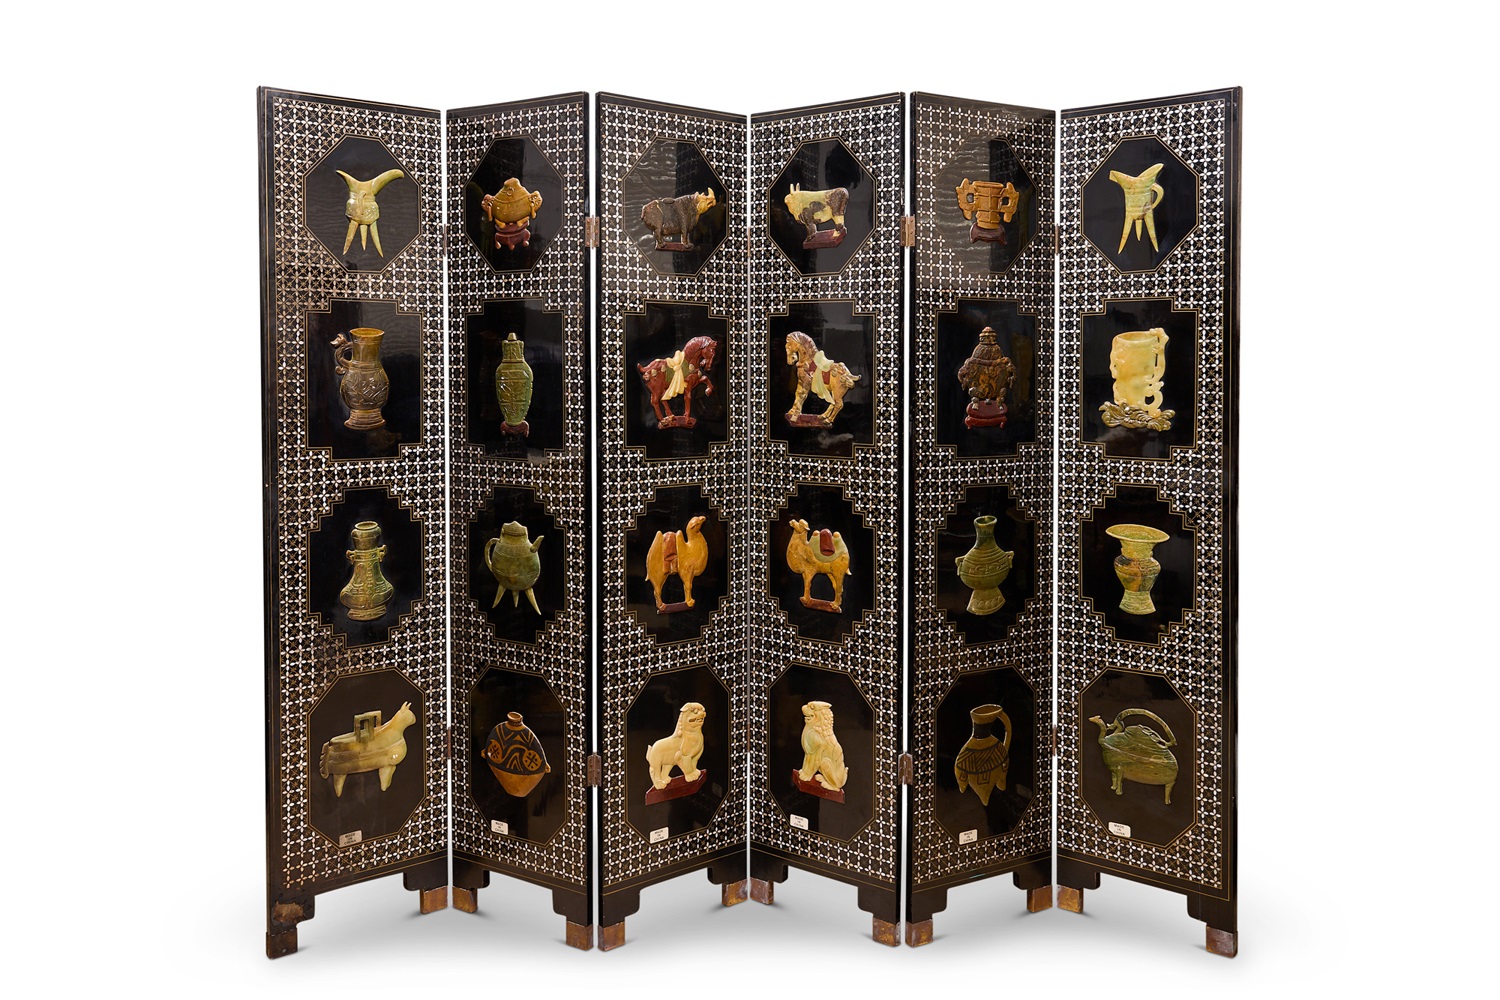 A CHINESE HARDSTONE AND MOTHER OF PEARL MOUNTED LACQUERED SCREEN